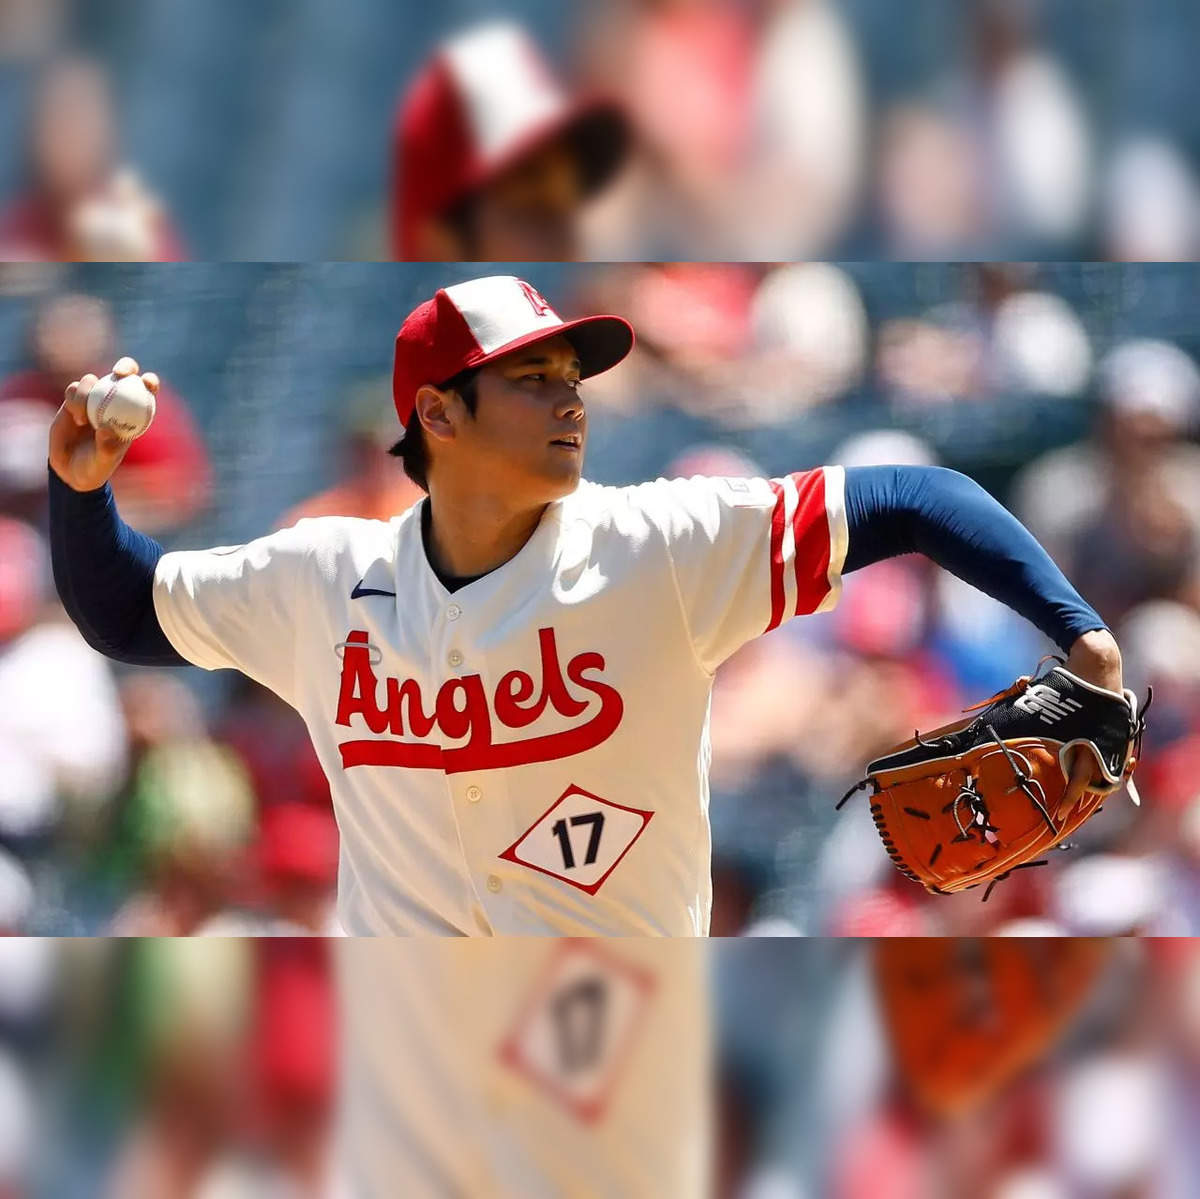 New MLB rule just made for Angels' Shohei Ohtani